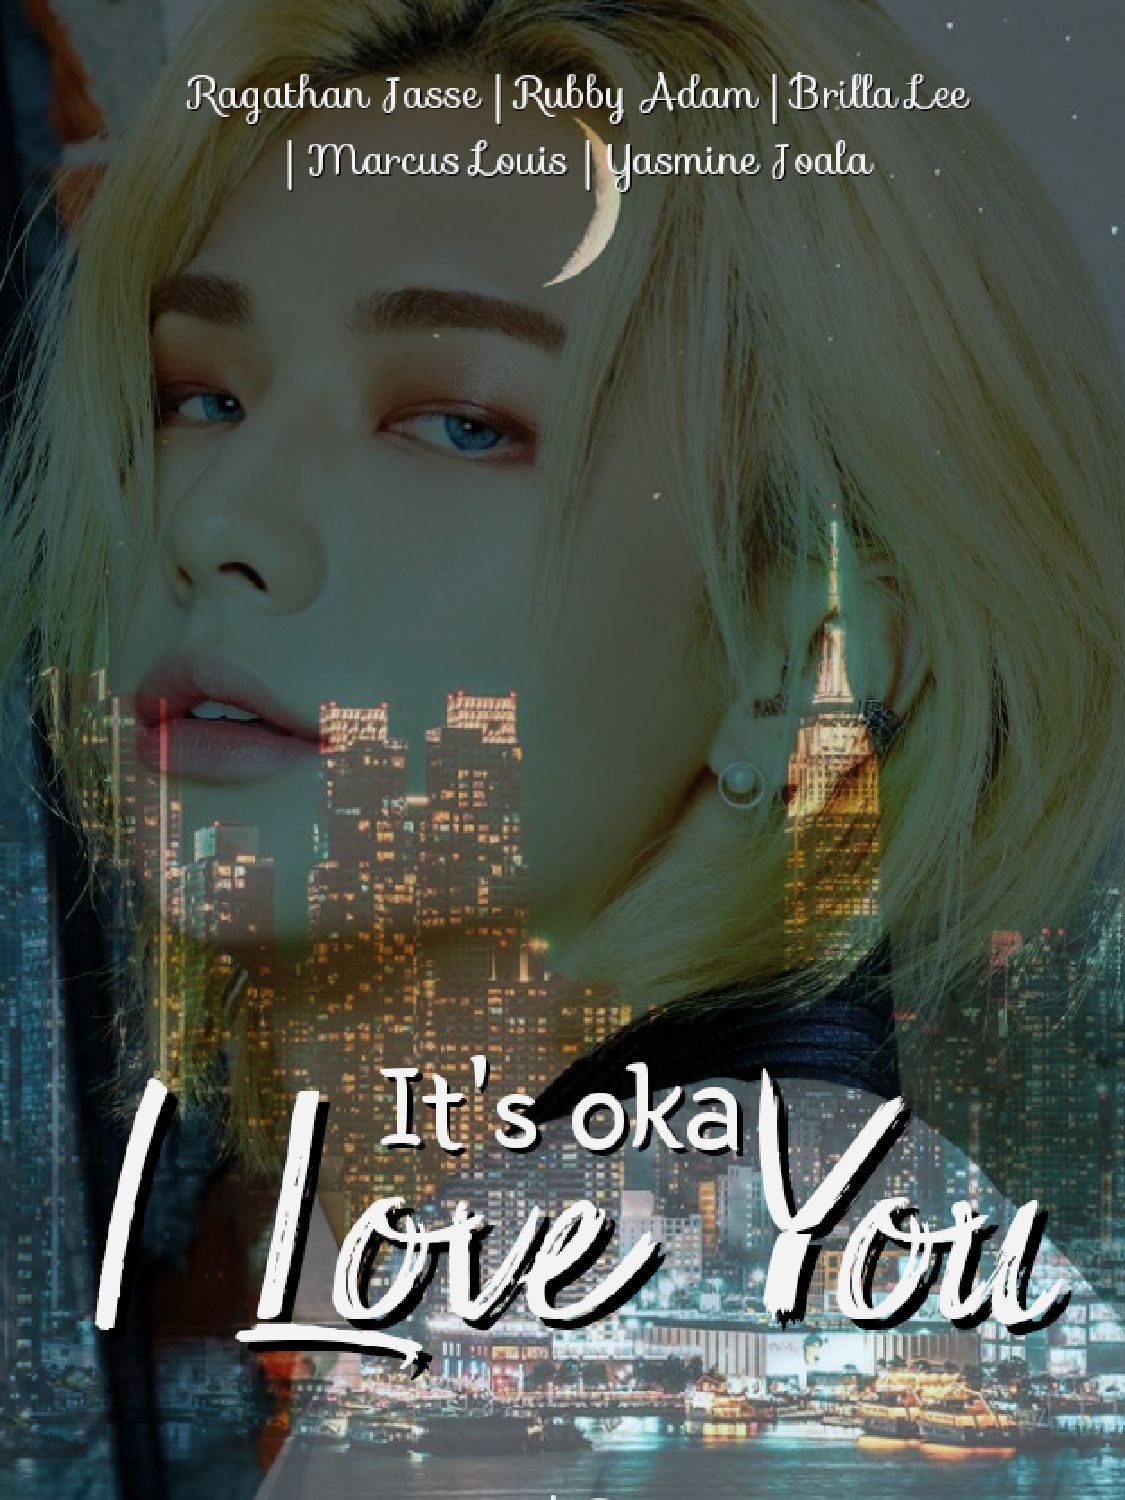 Would it be Okay to Love You? by Amy Tasukada